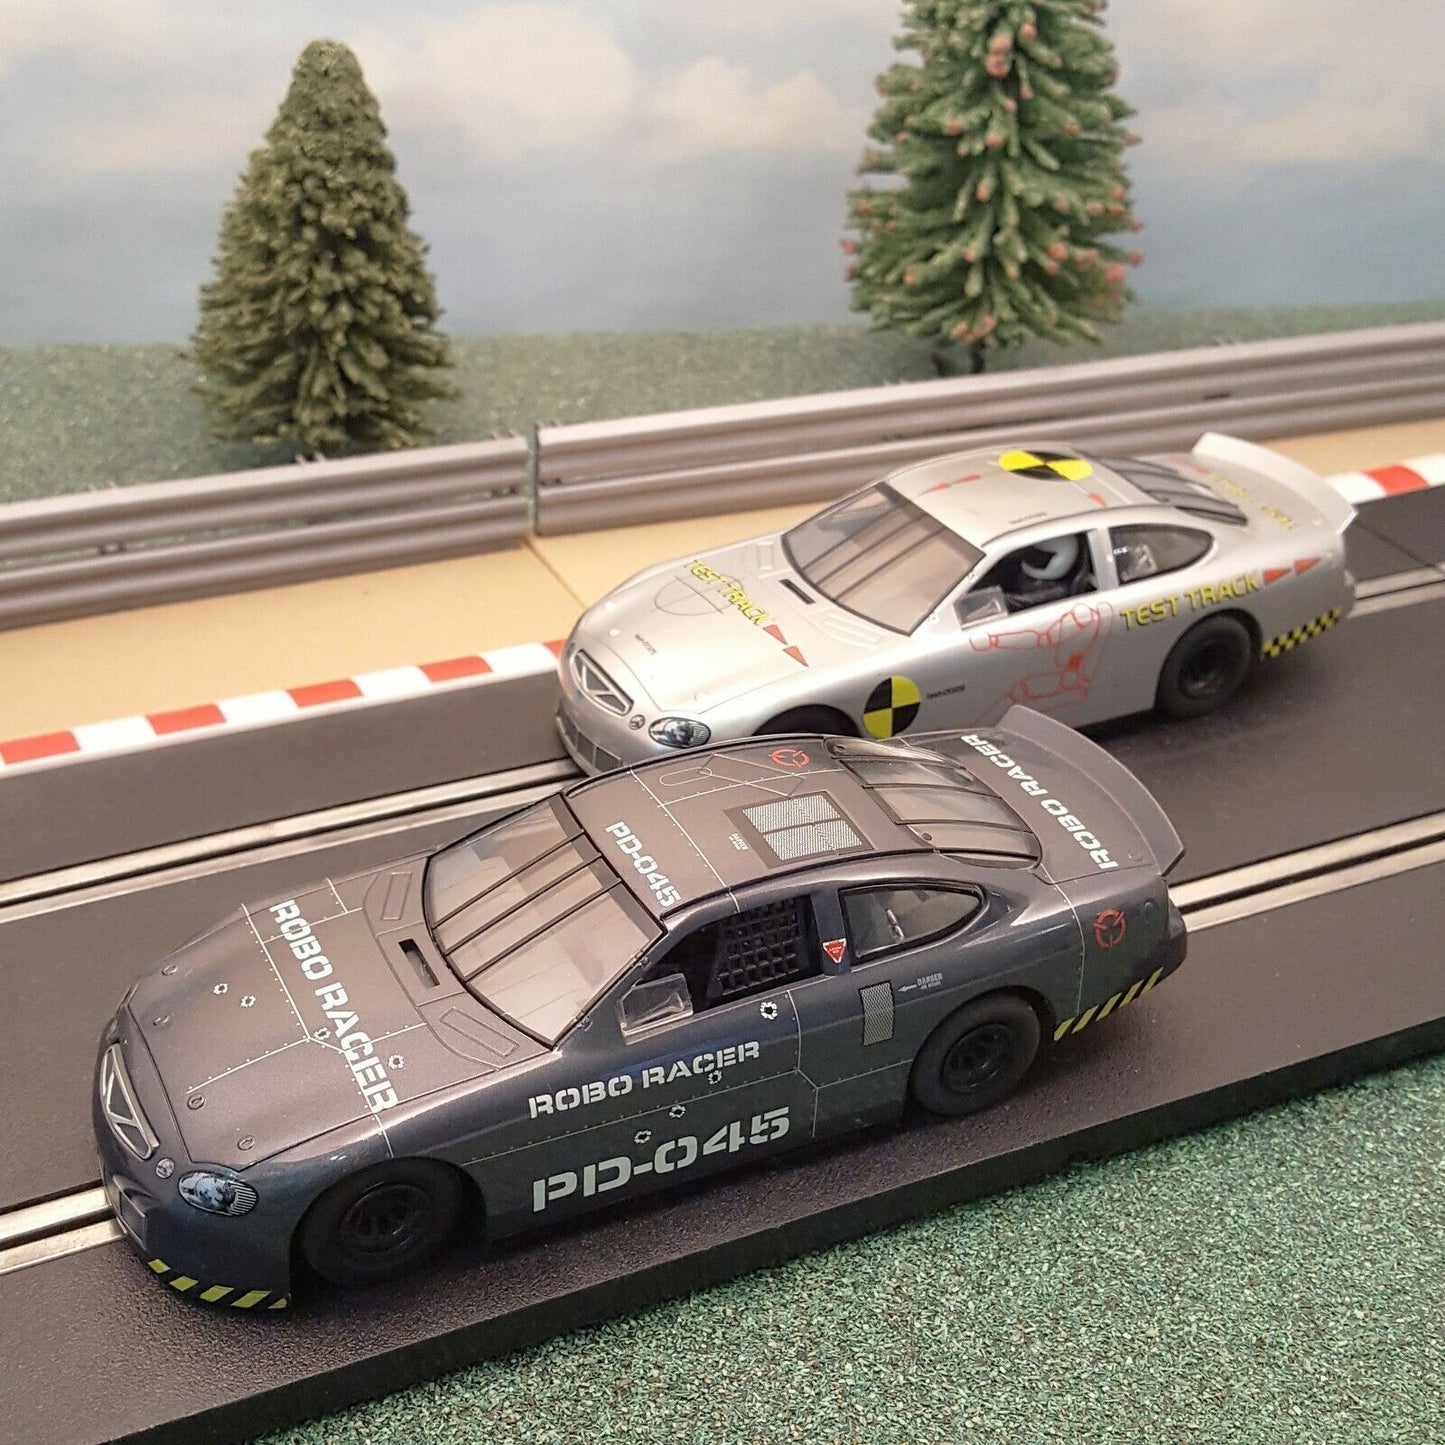 Scalextric Sport 1:32 Track Set - Large Layout With Ford Taurus Cars #FA